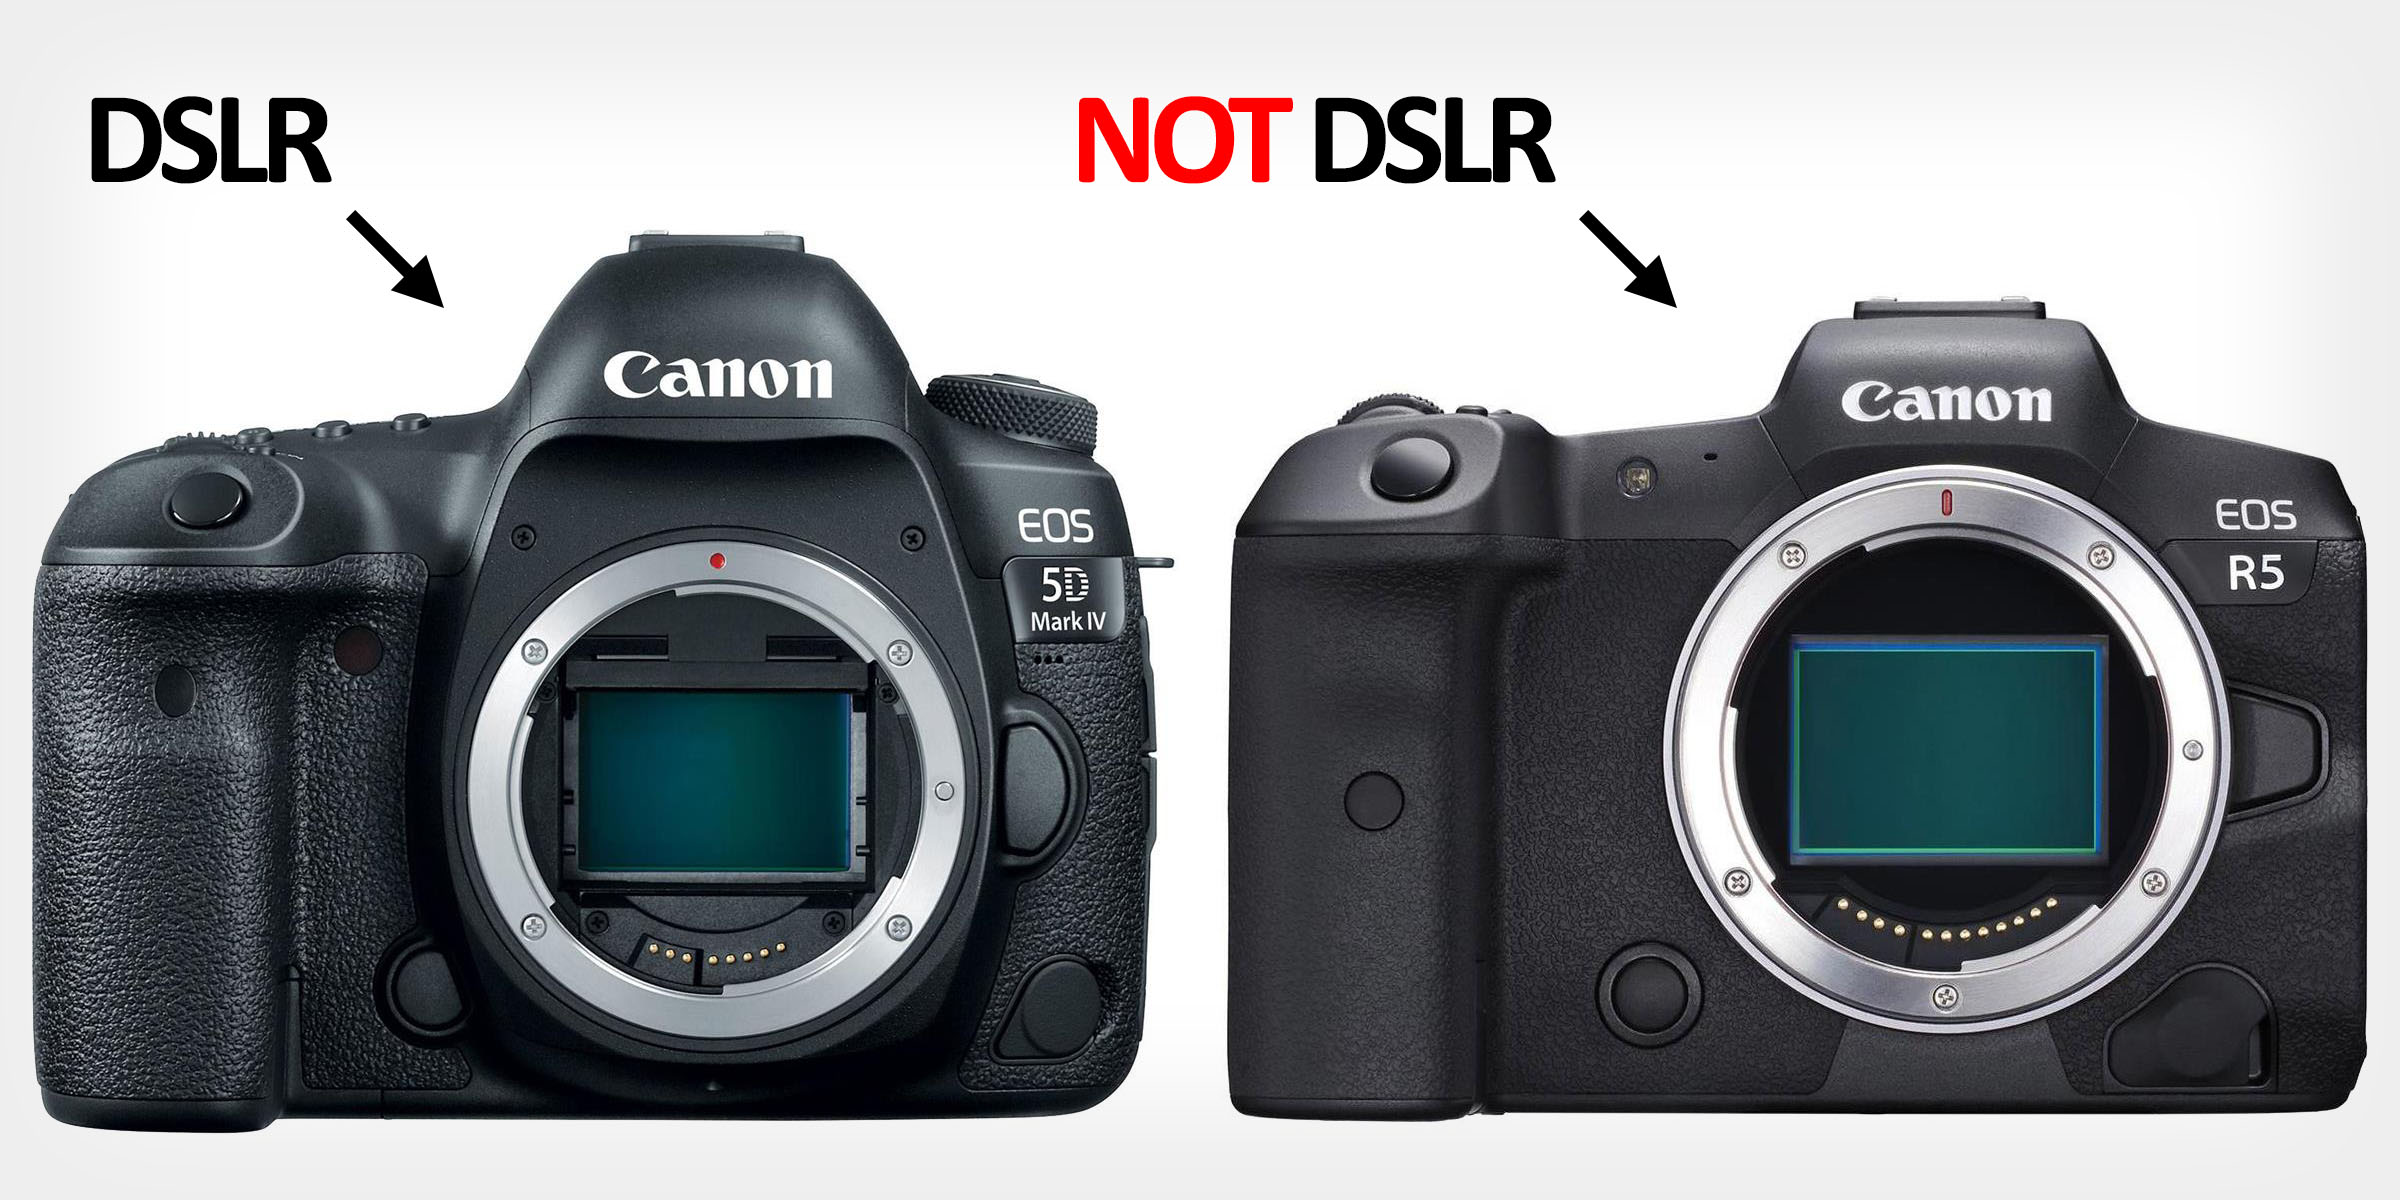 Canon EOS R5: Your days of blaming the camera are over